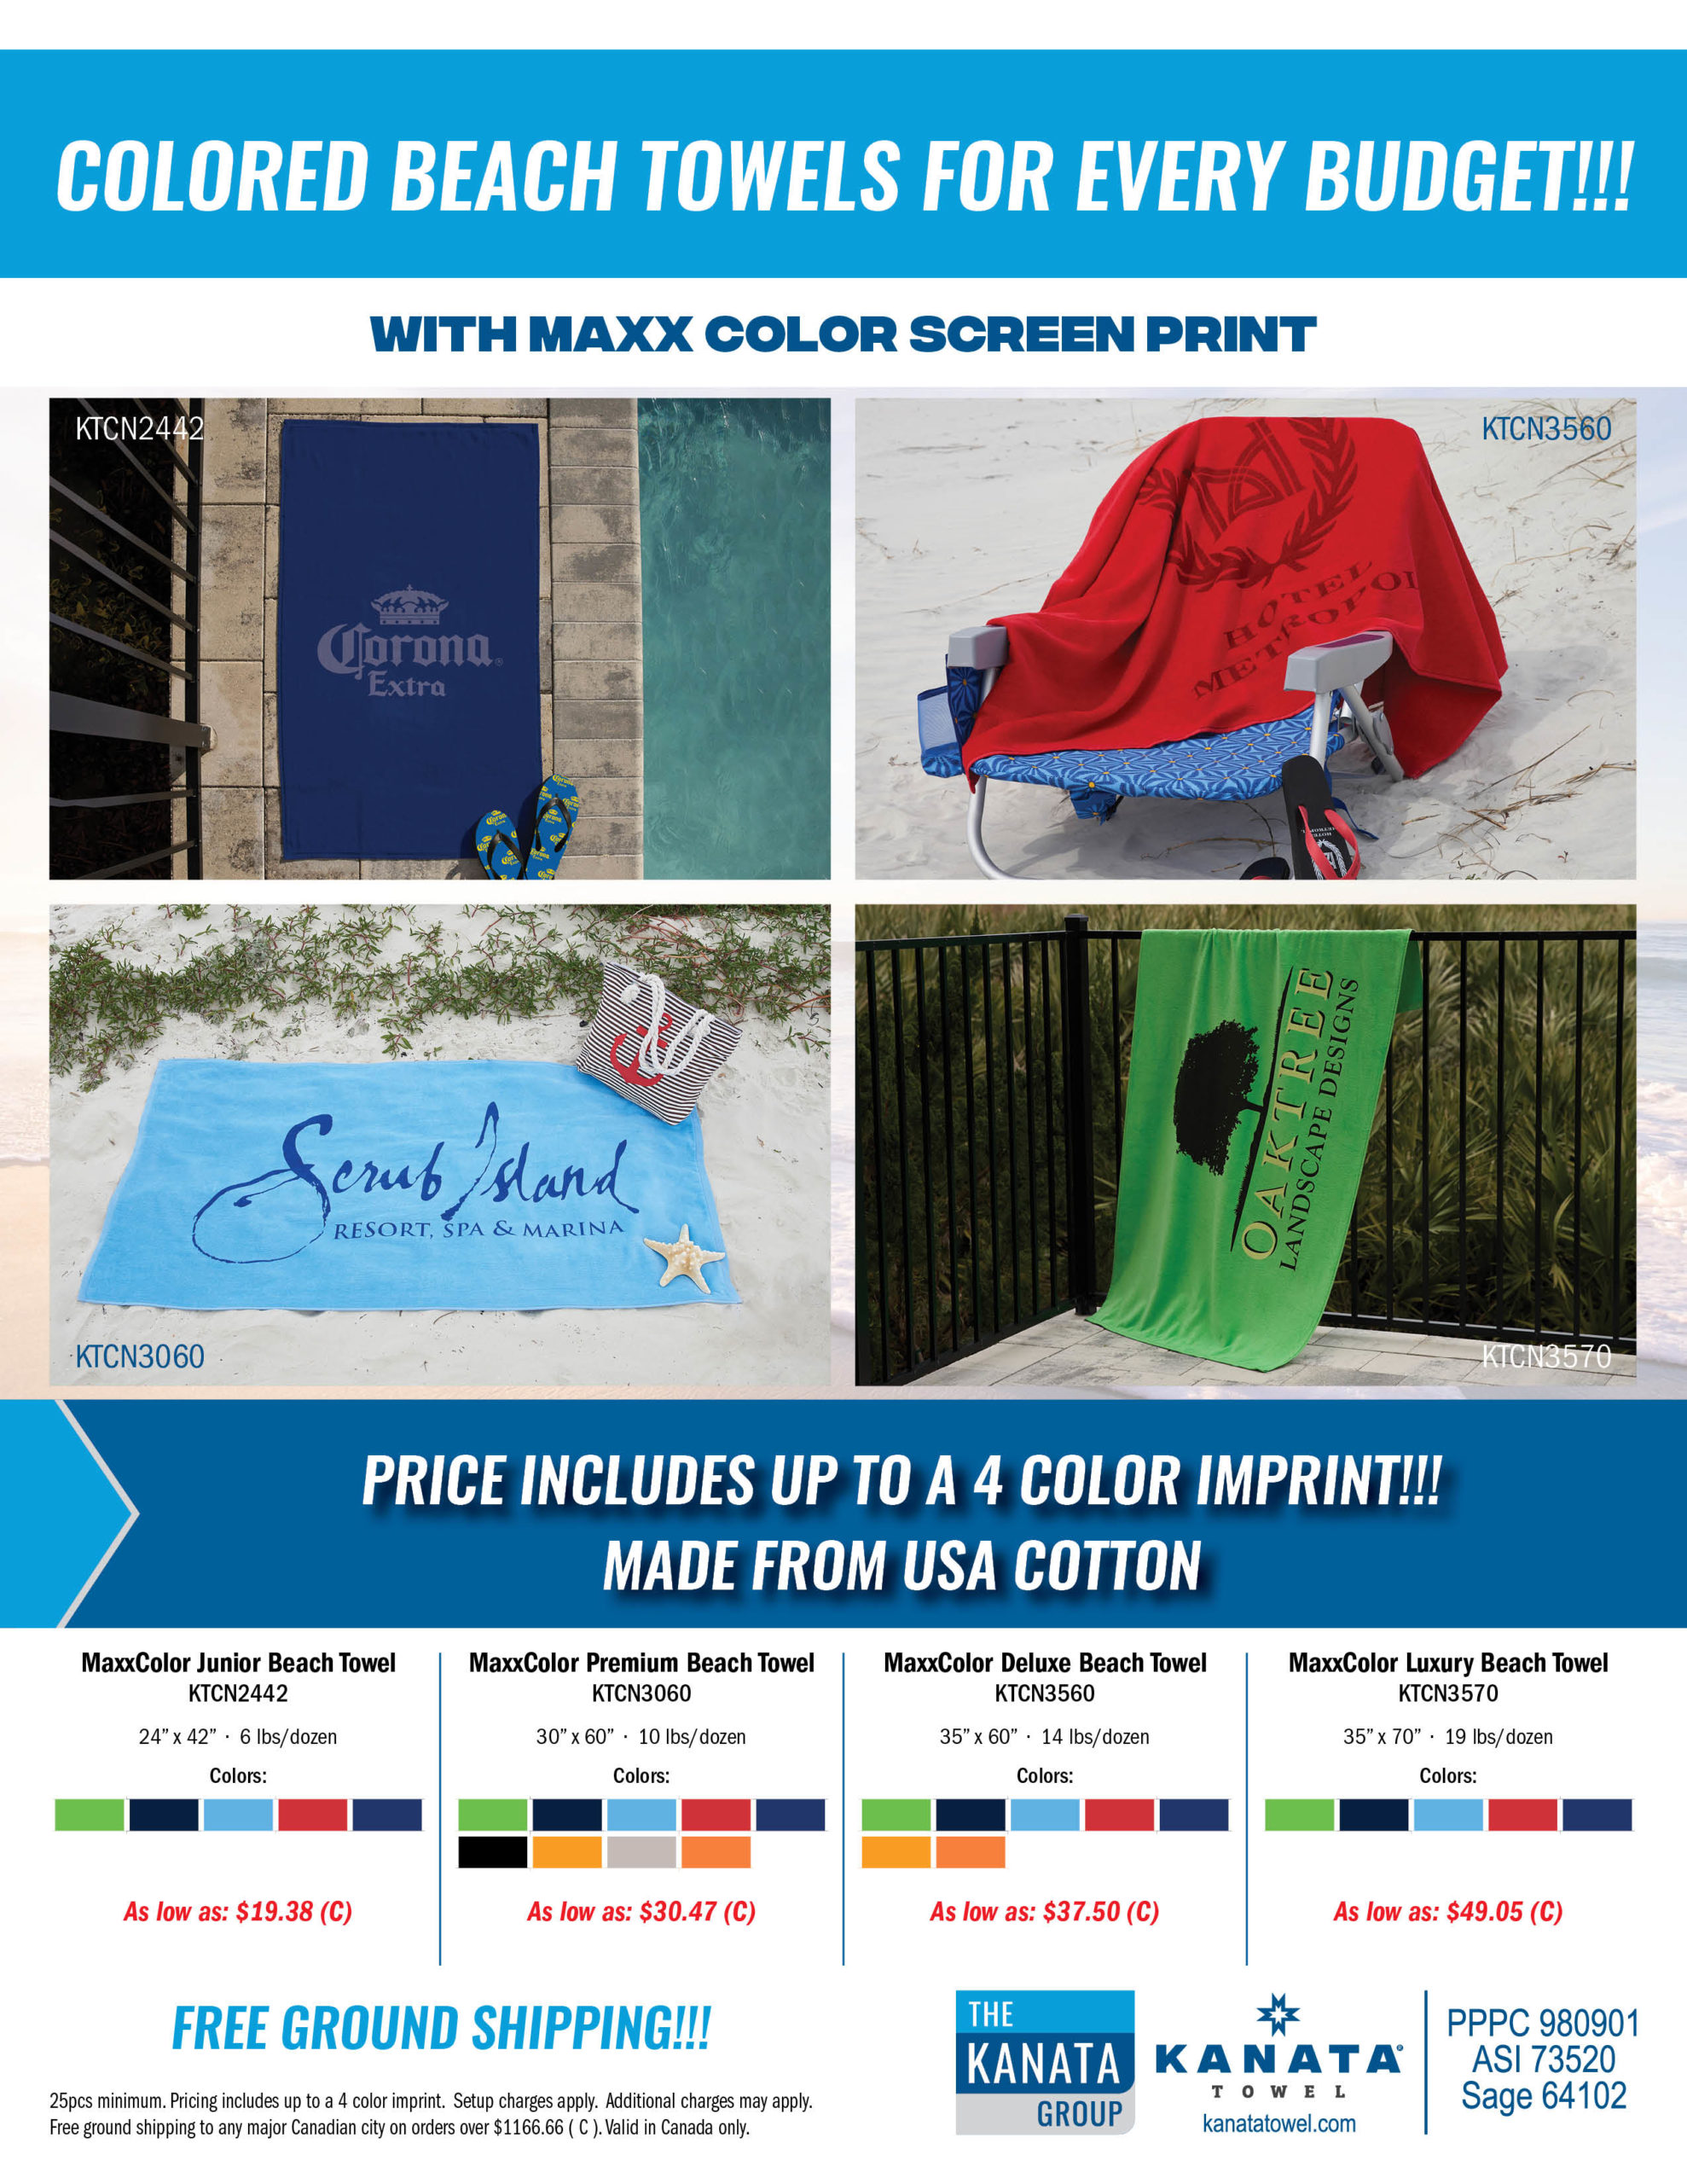 Colored Beach Towels For Every Budget!